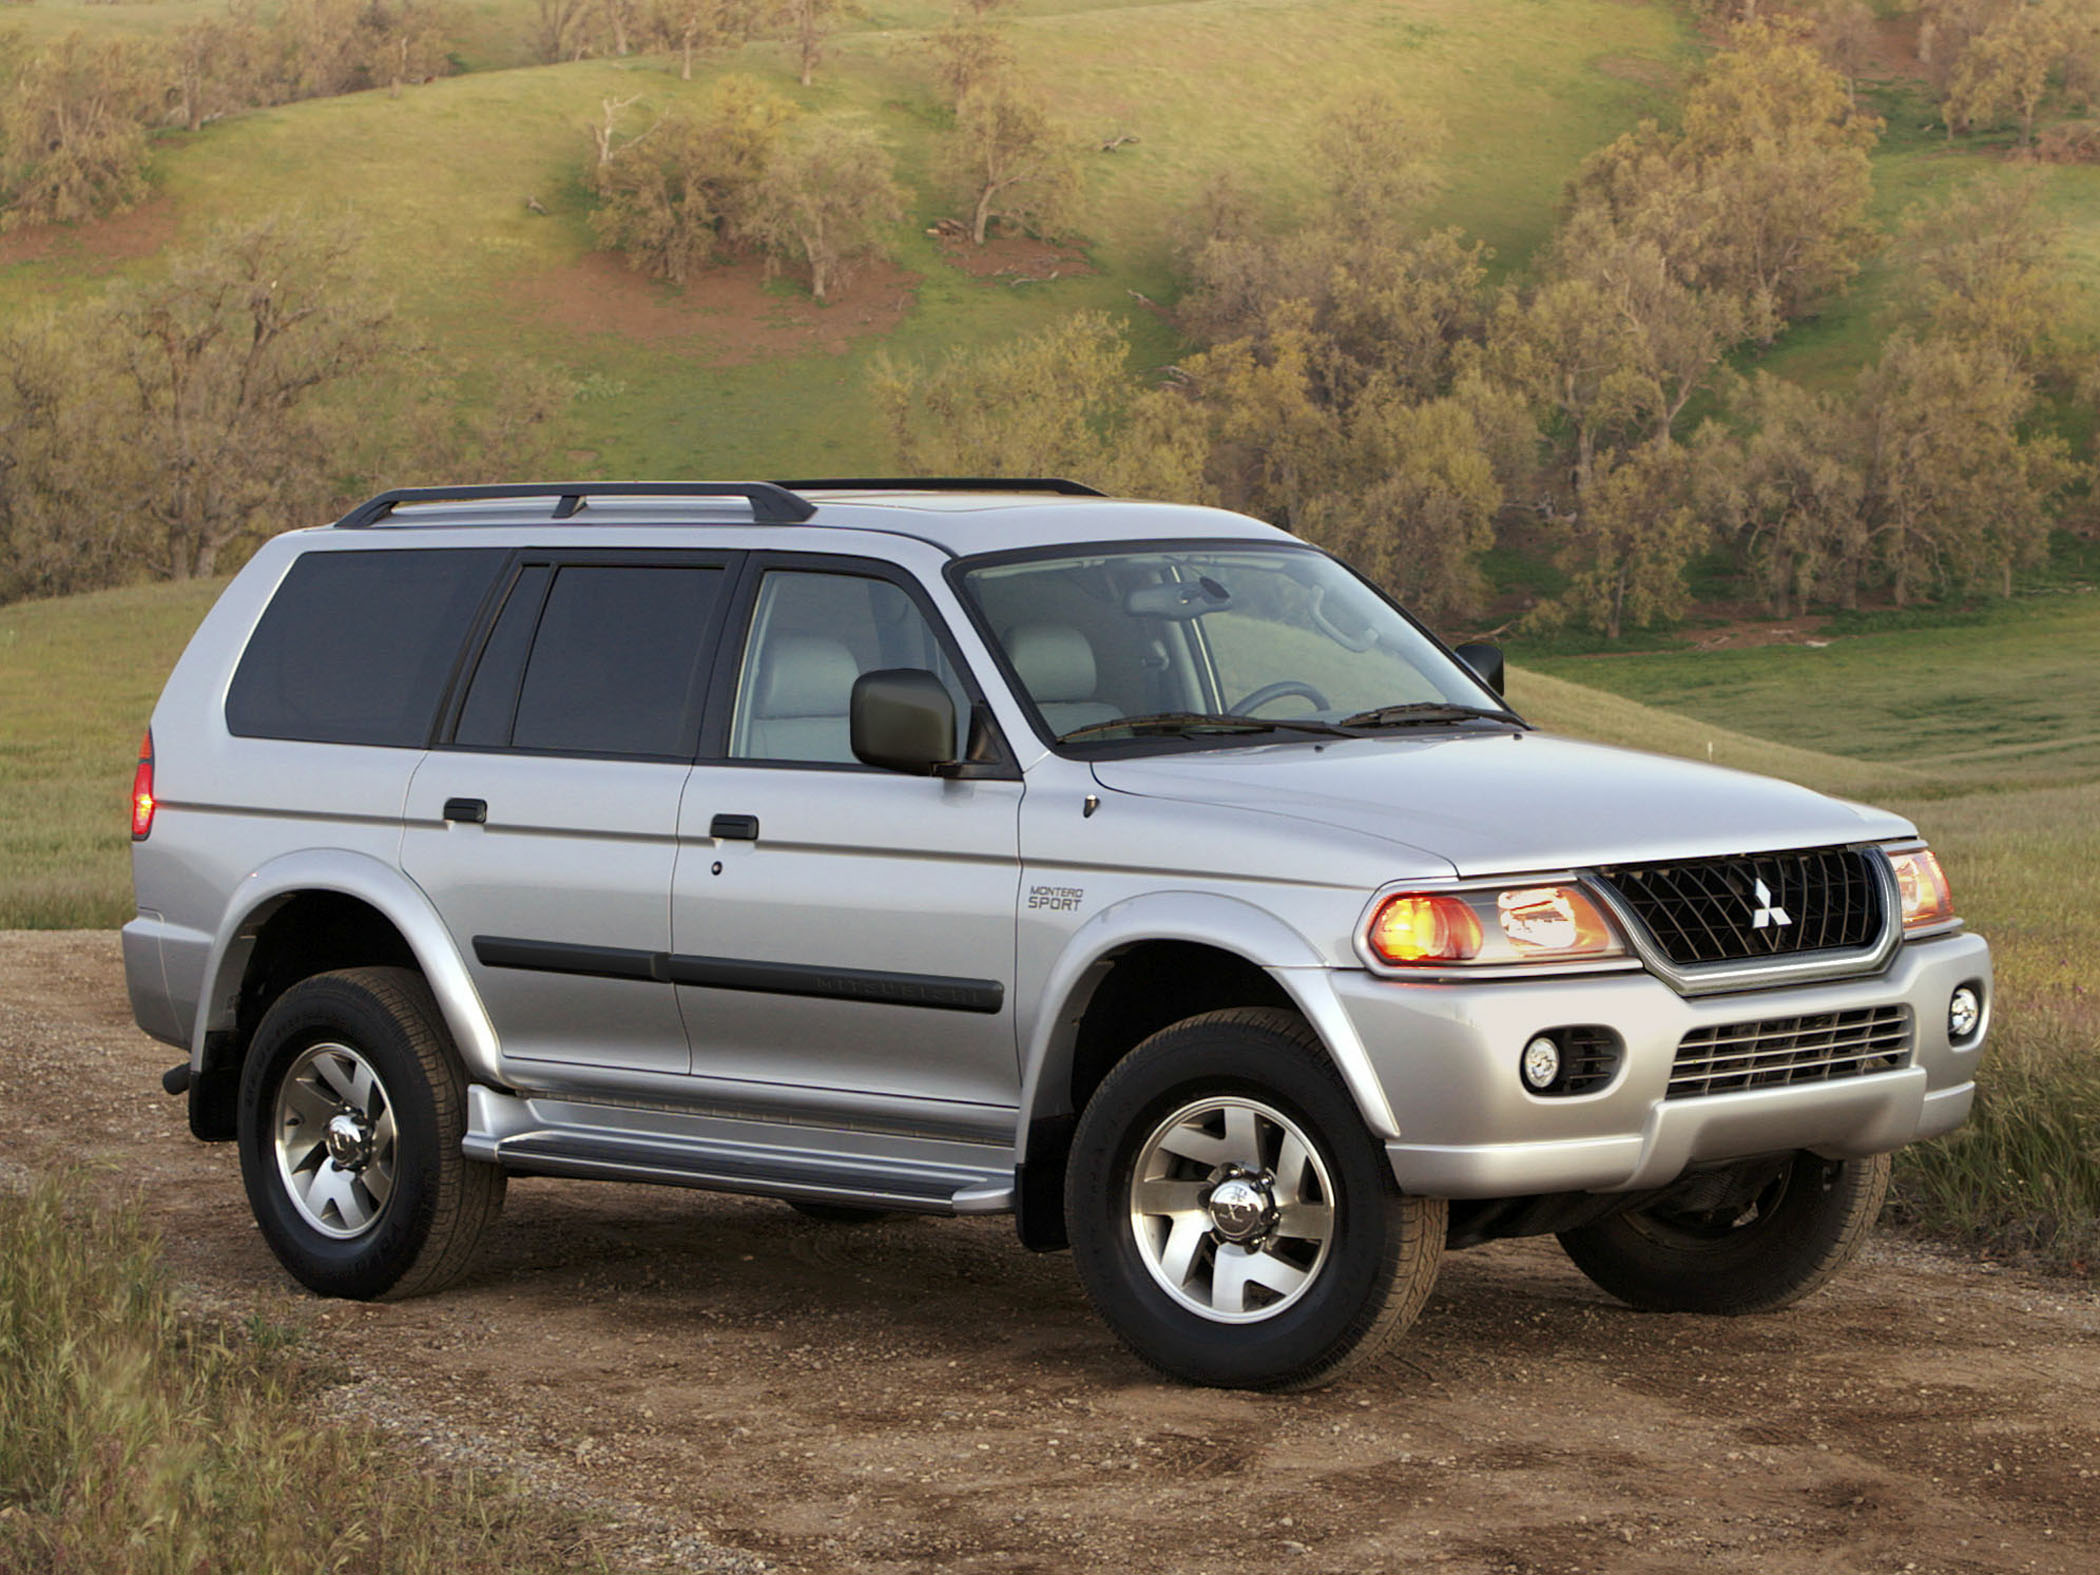 5 enduring features in the Mitsubishi Montero Sport that make it a